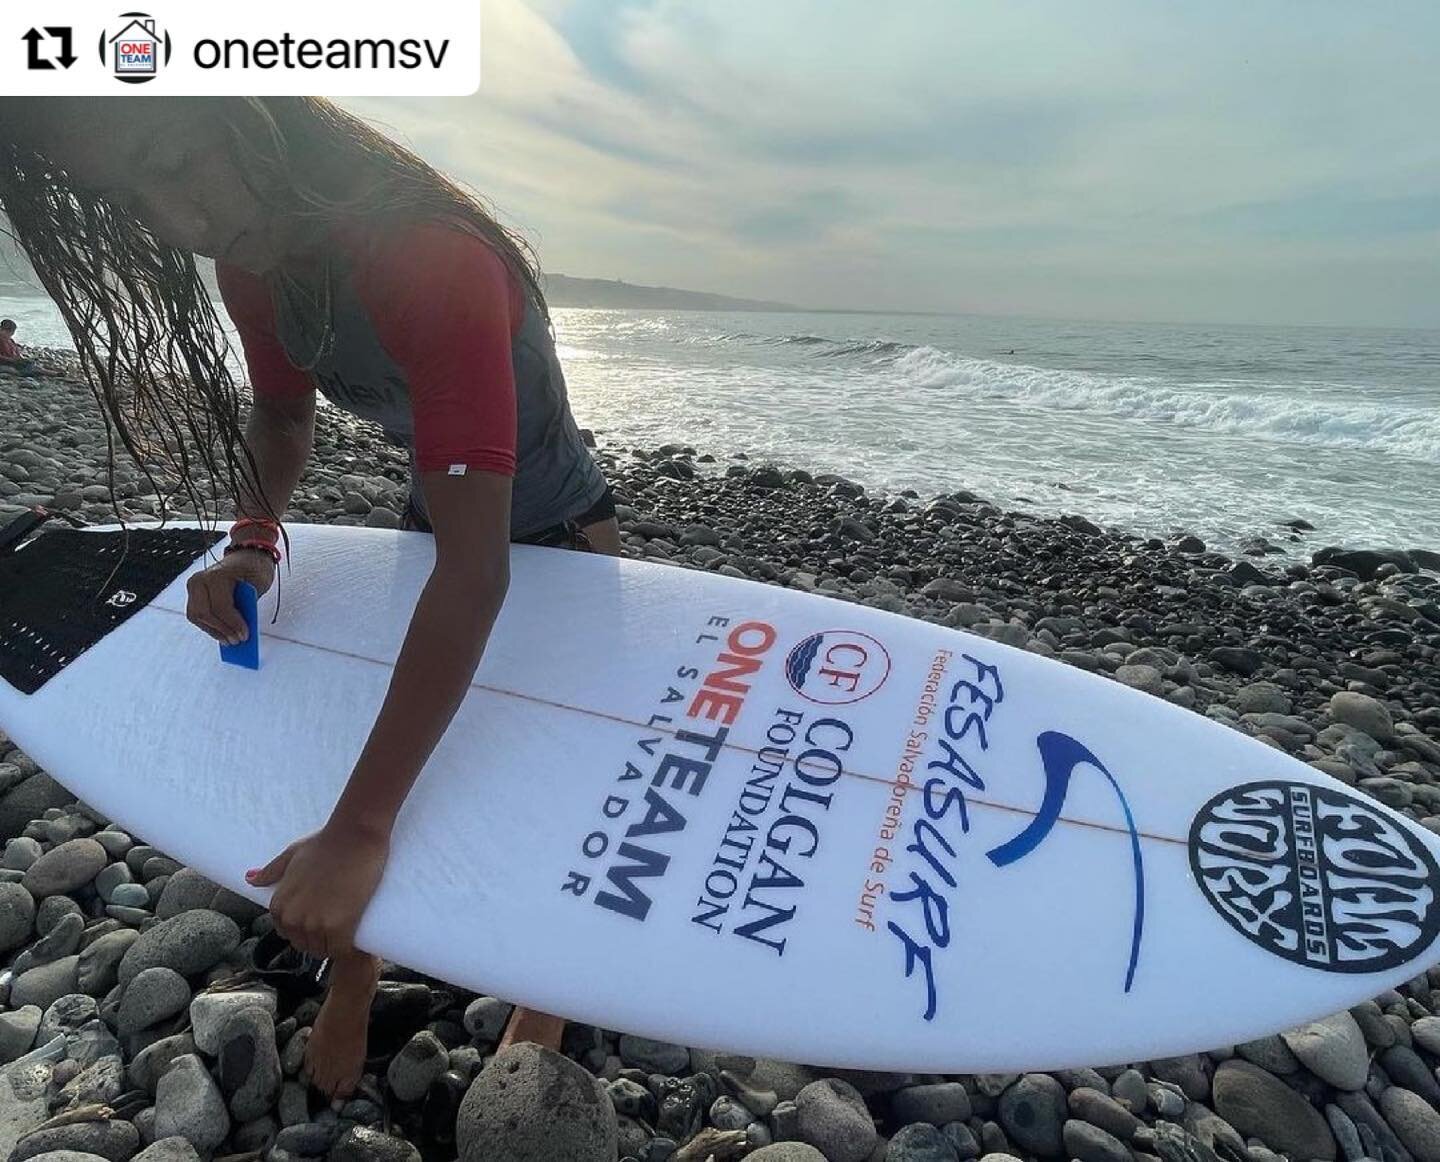 The junior surf program ripping it up on the new surf boards. @oneteamsv challenges, educates, &amp; mentors these kids to have healthy lifestyles, as well as being active participants in the community. Colgan Foundation is proud to be apart of this 